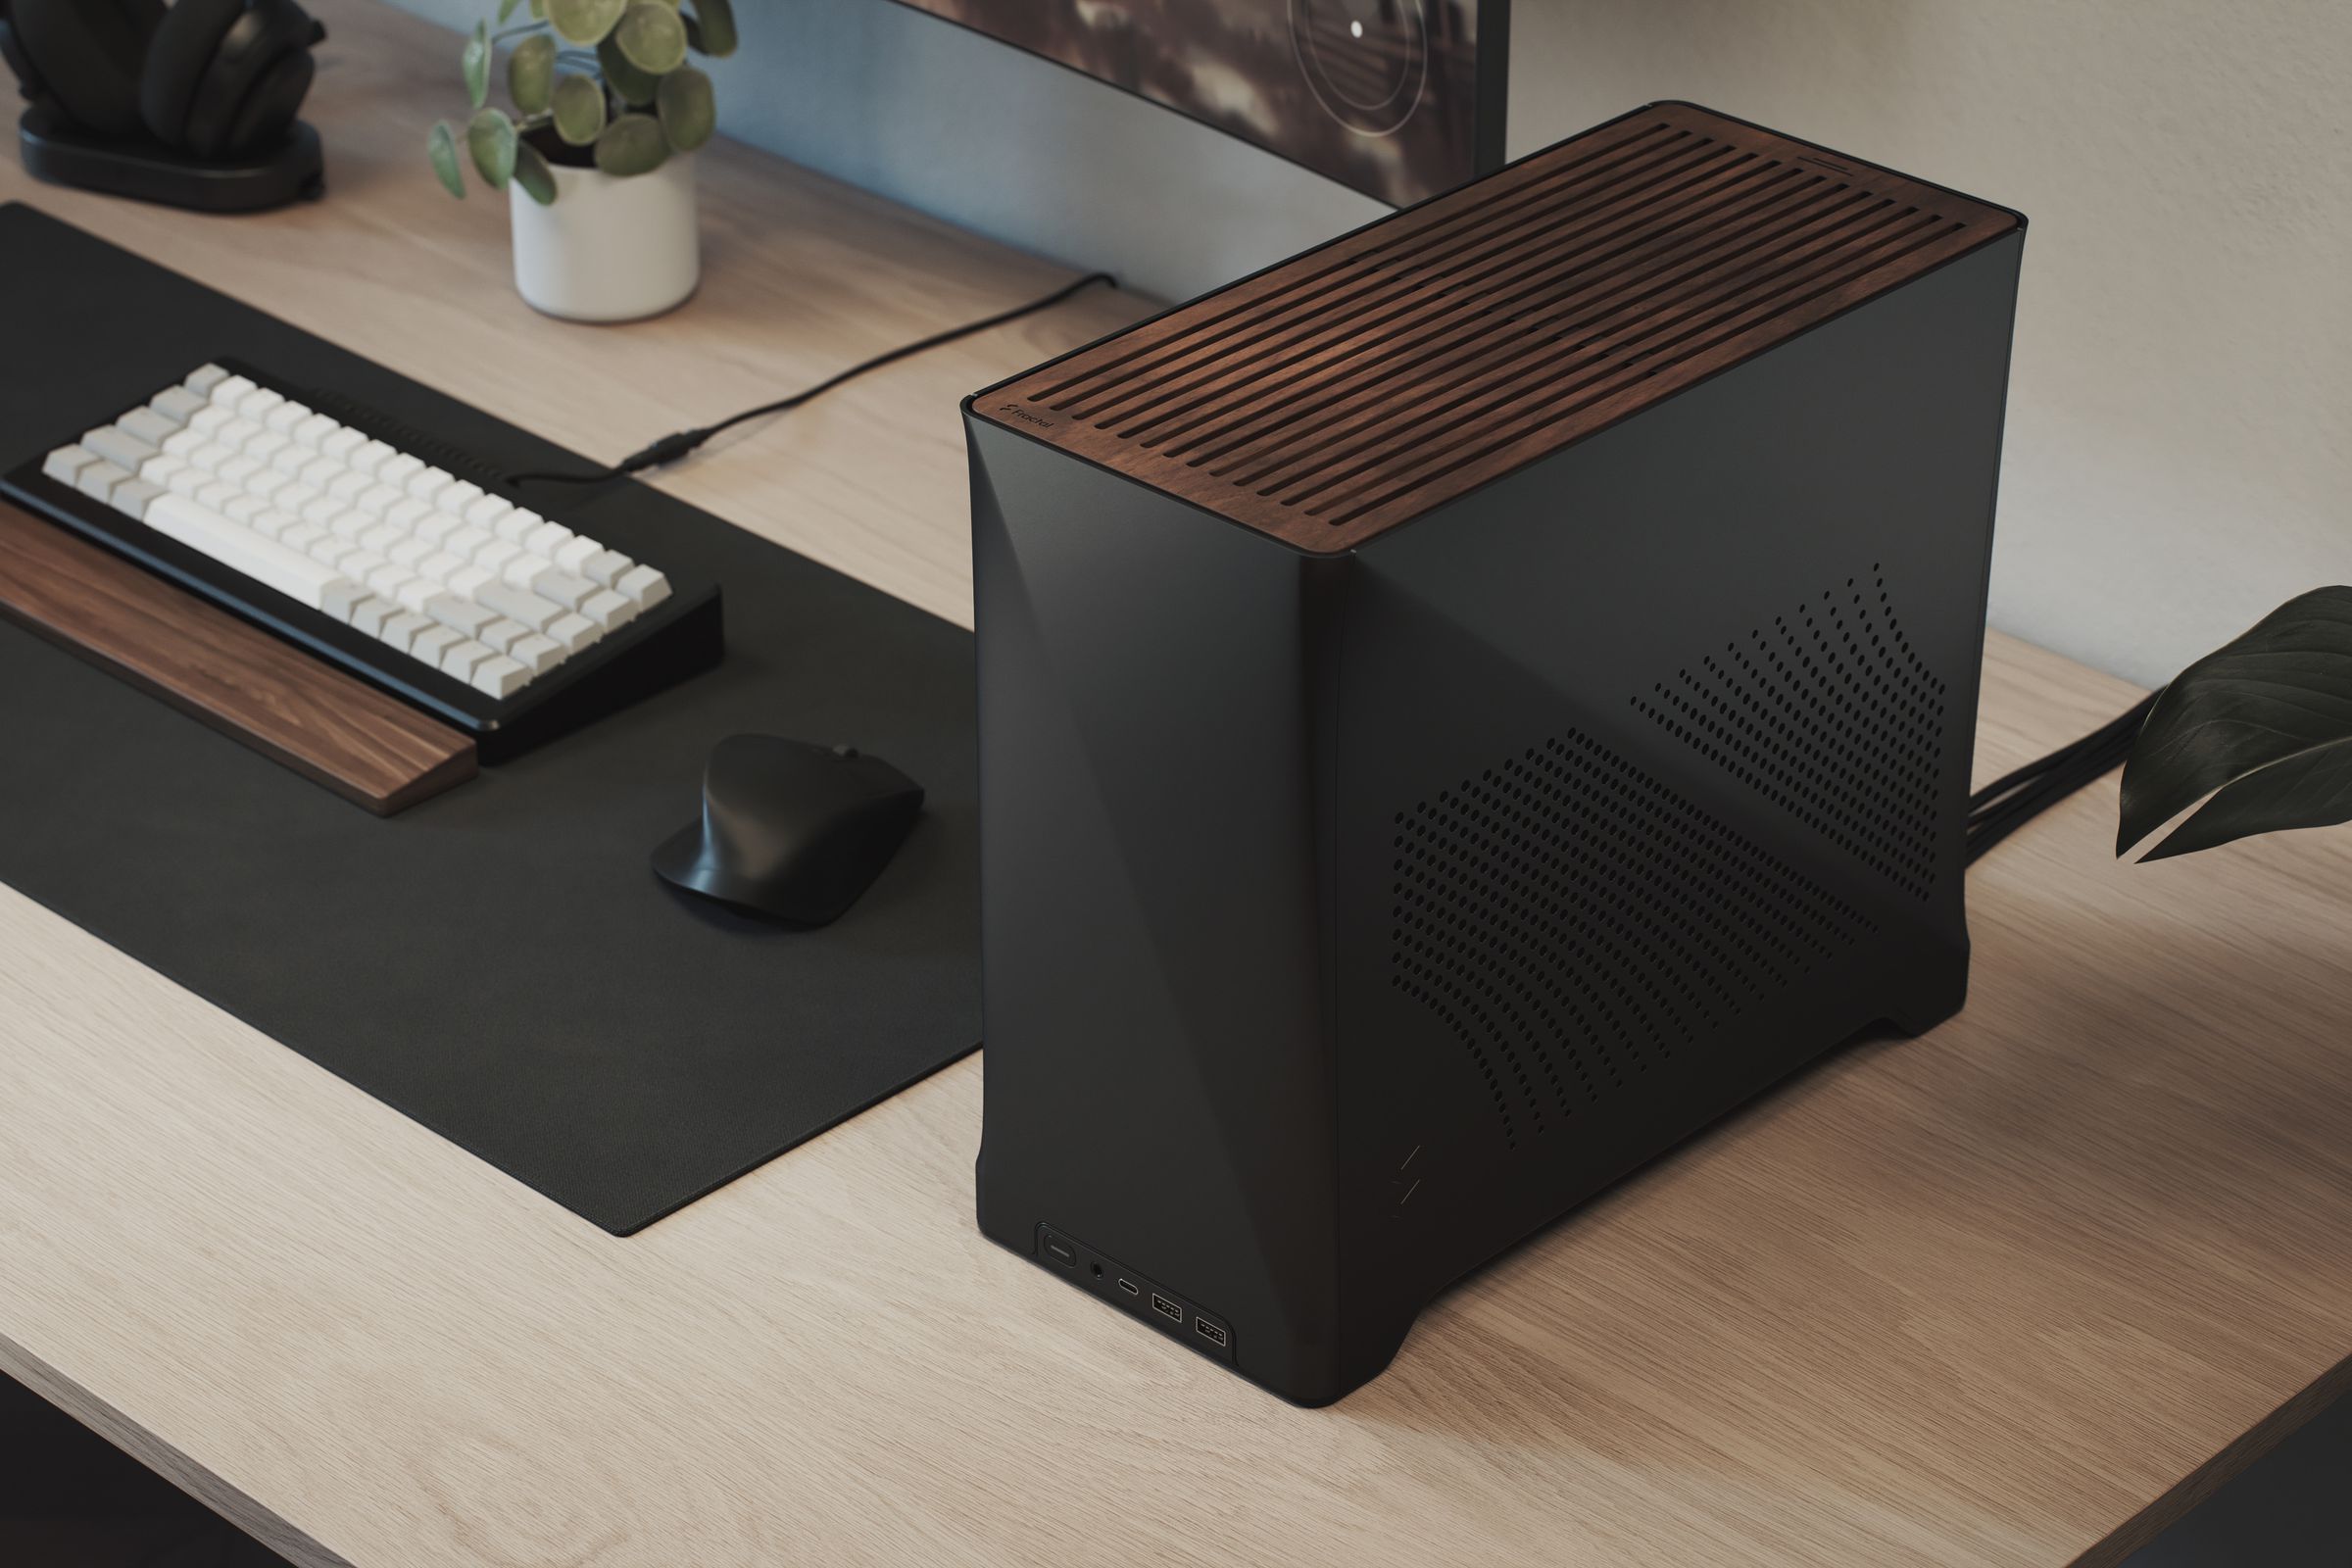 A small desktop PC case with wood paneling on the top next to a keyboard, mouse, and monitor.